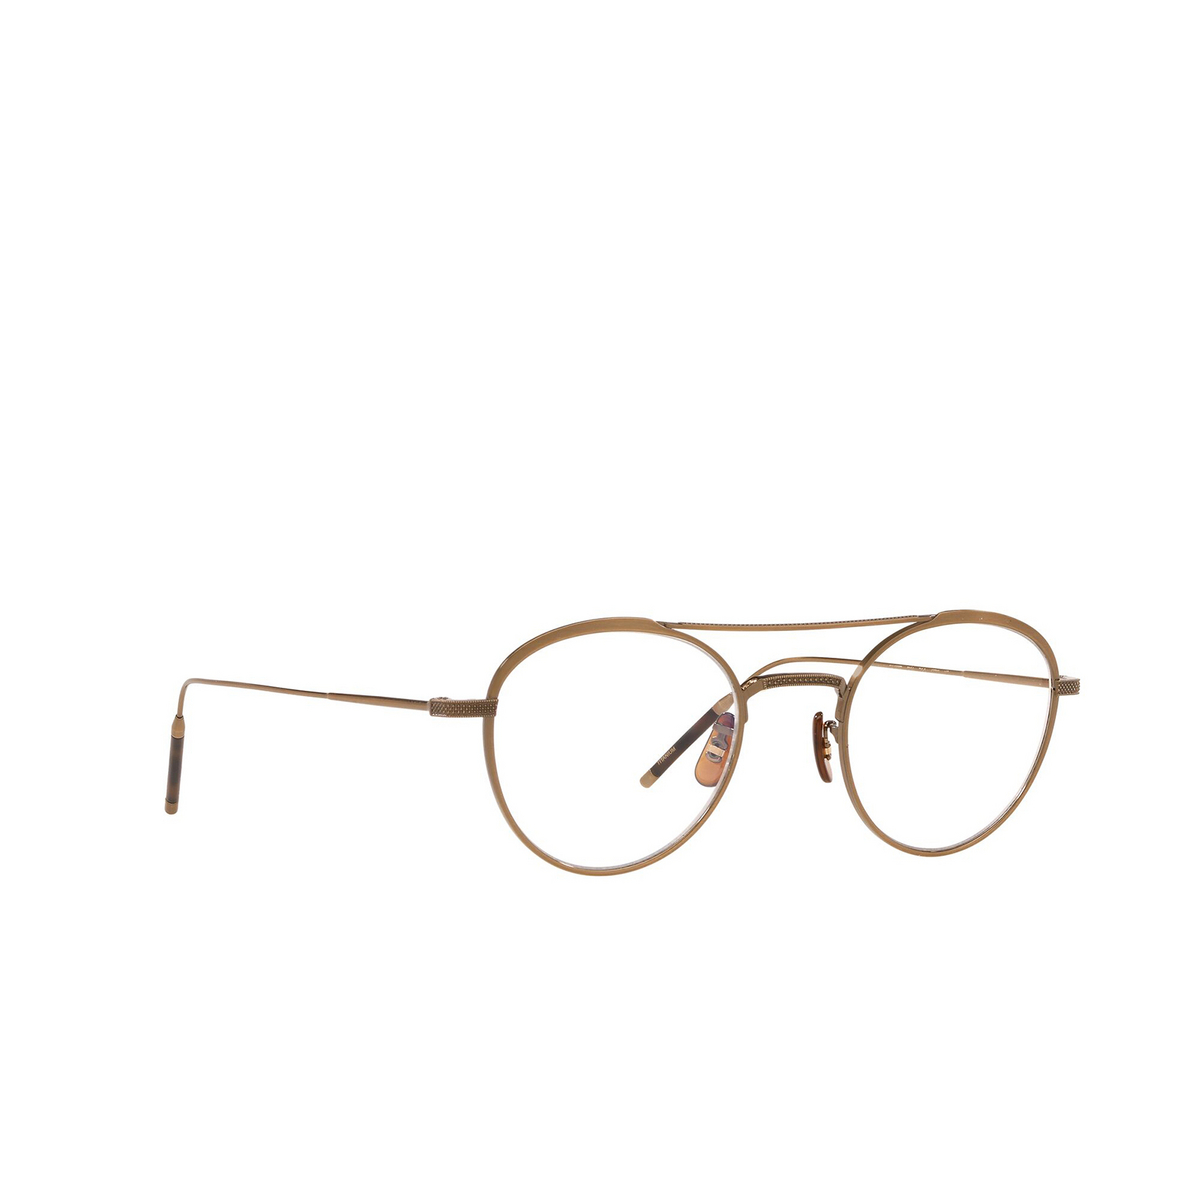 Oliver Peoples® Round Eyeglasses: Tk-2 OV1275T color Antique Gold 5284 - three-quarters view.